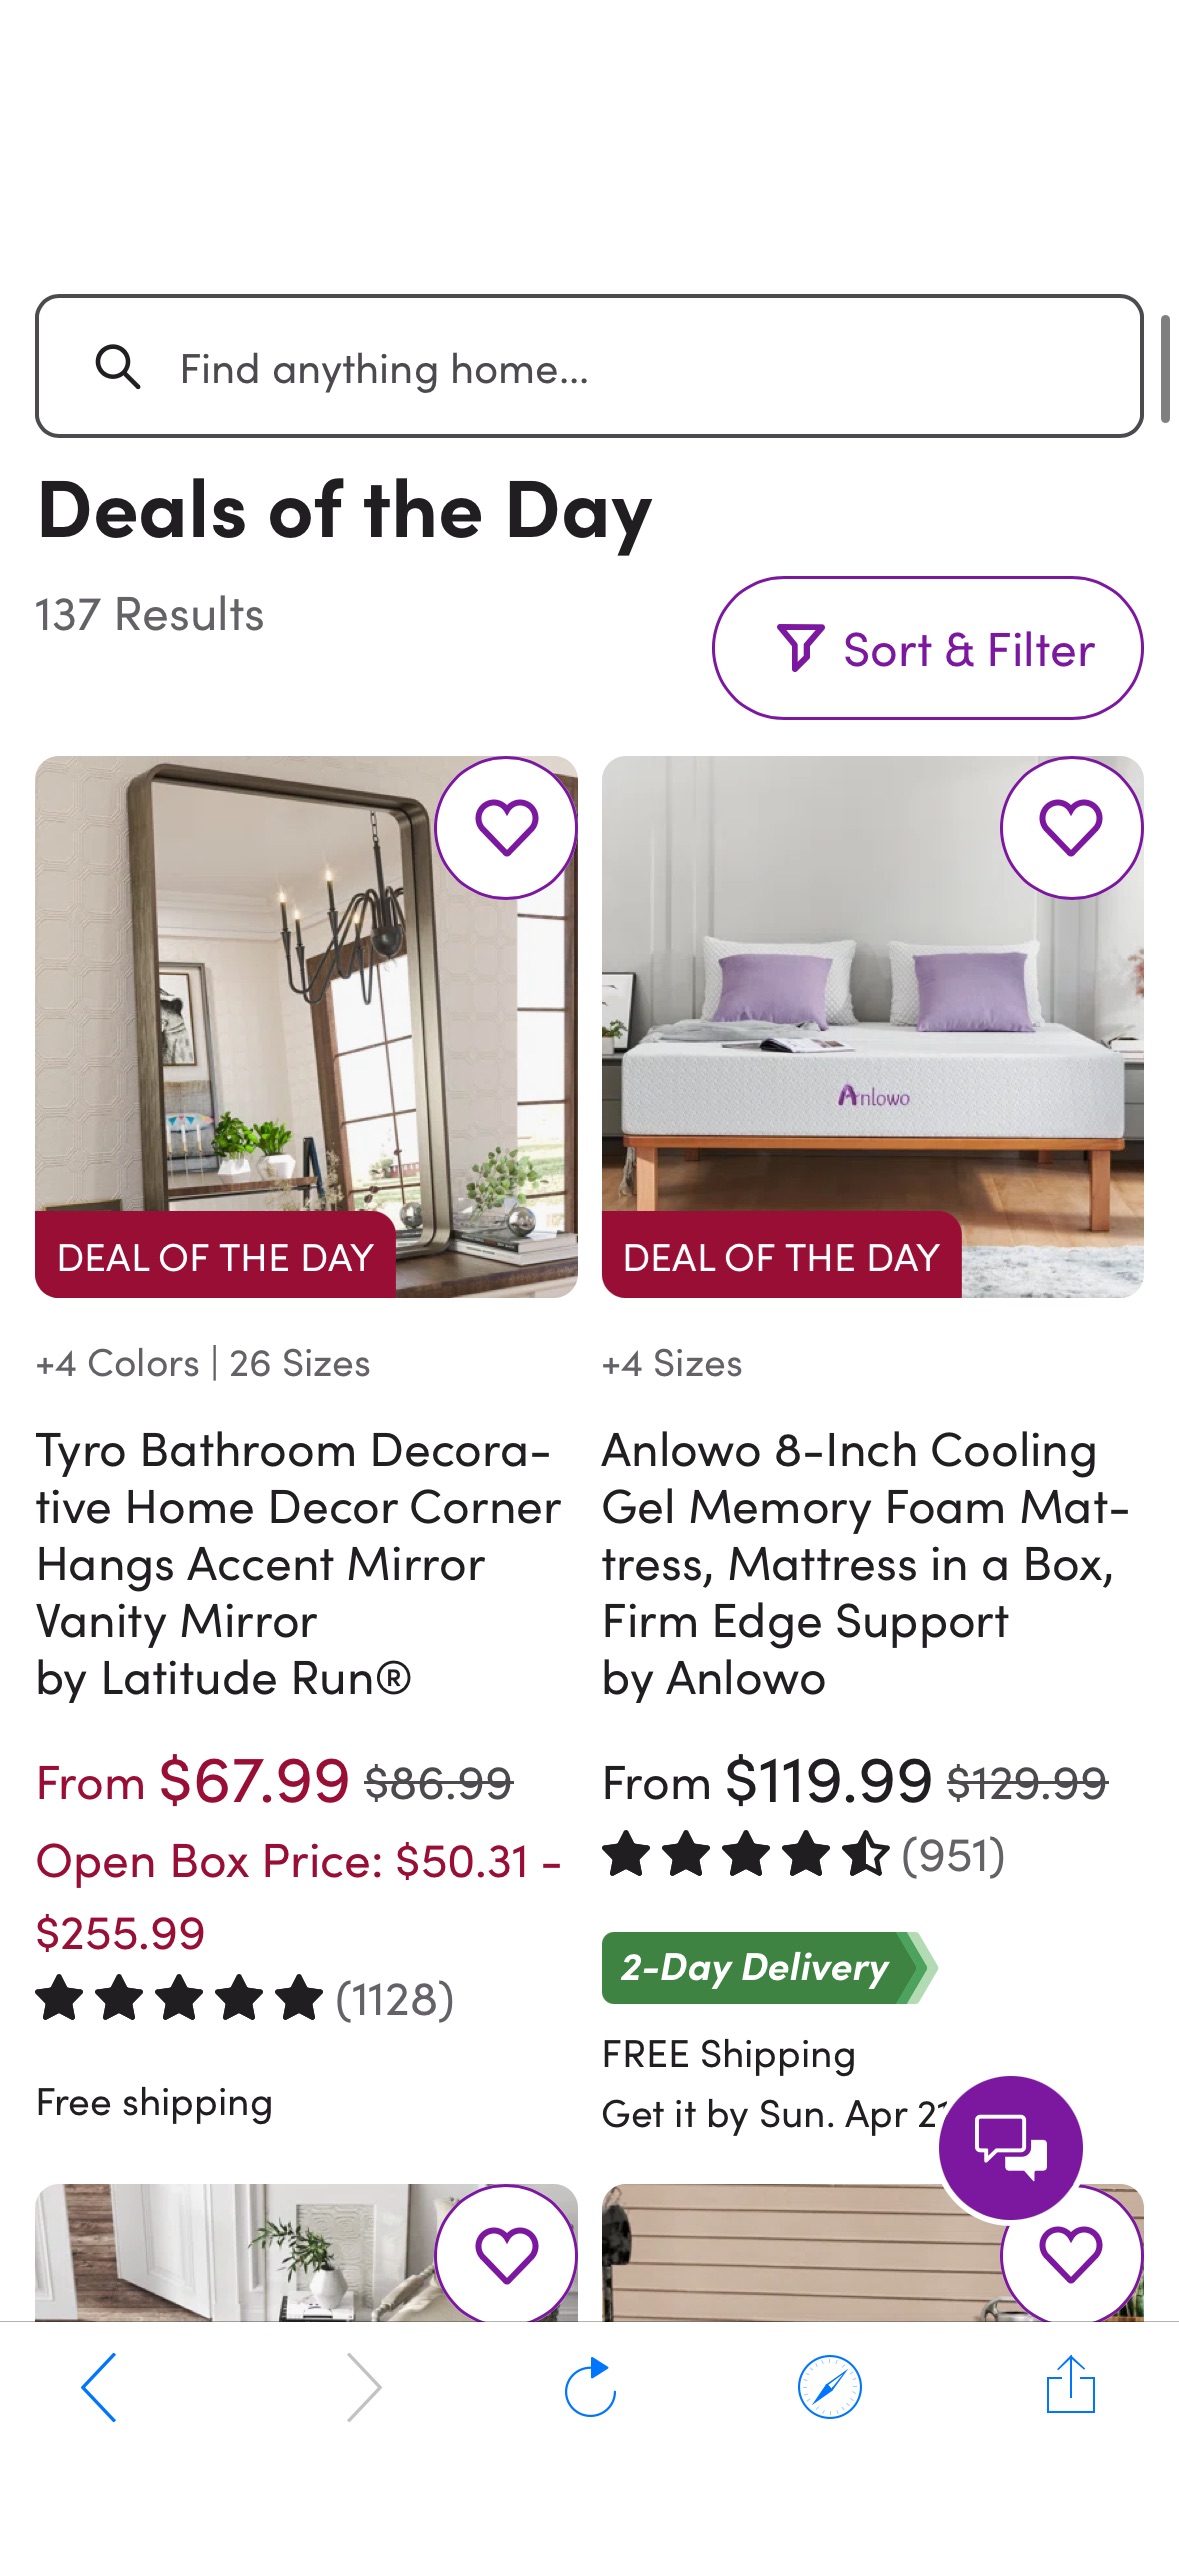 Hot Wayfair Deals of the Day! Firepits, Rugs, Coffee Tables and More